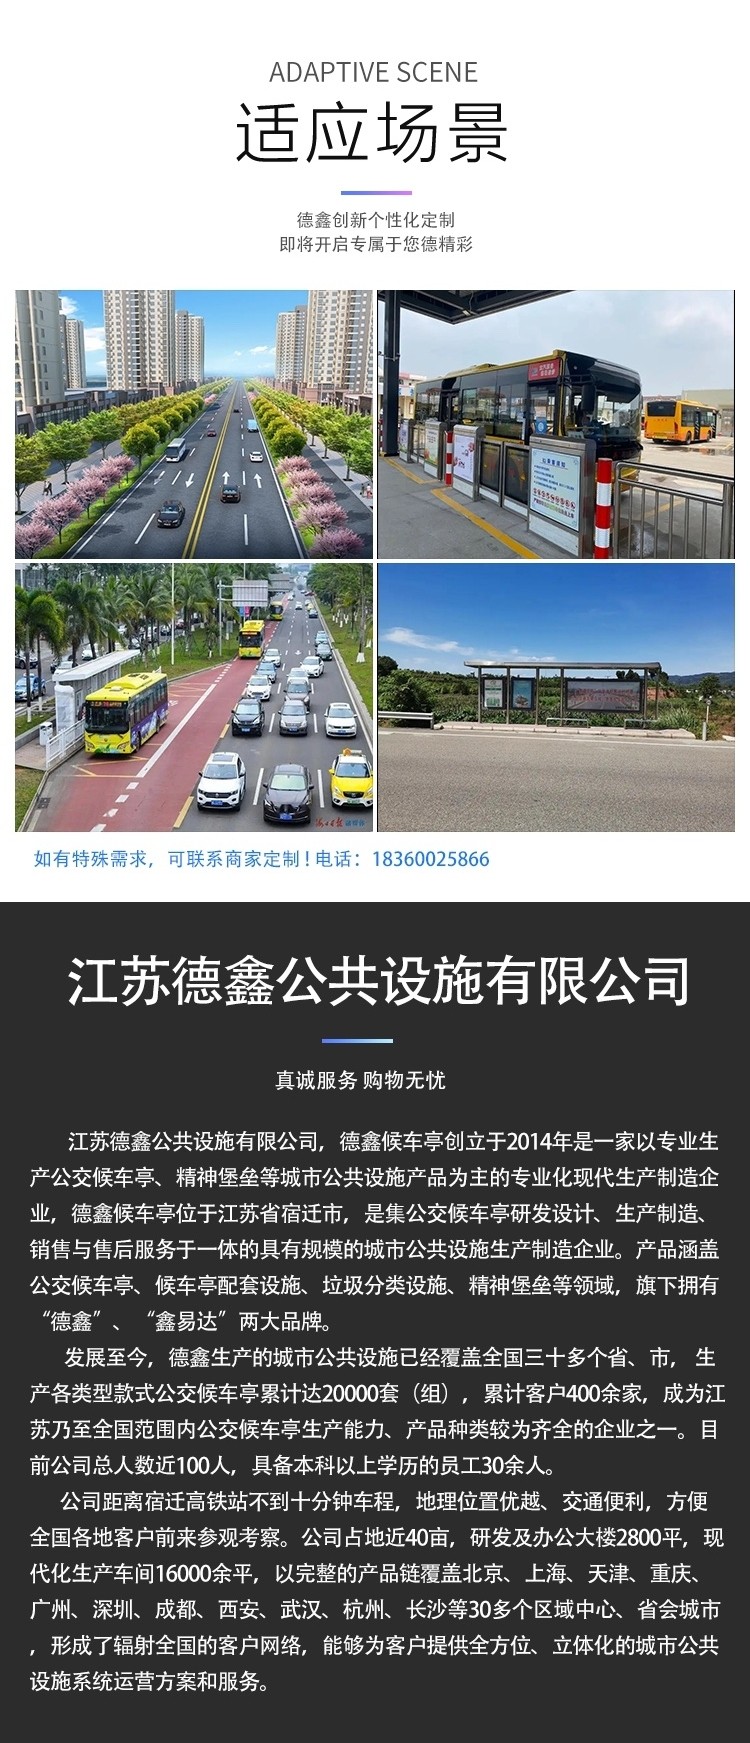 New modern bus stop design for urban bus shelters, customized and free of charge